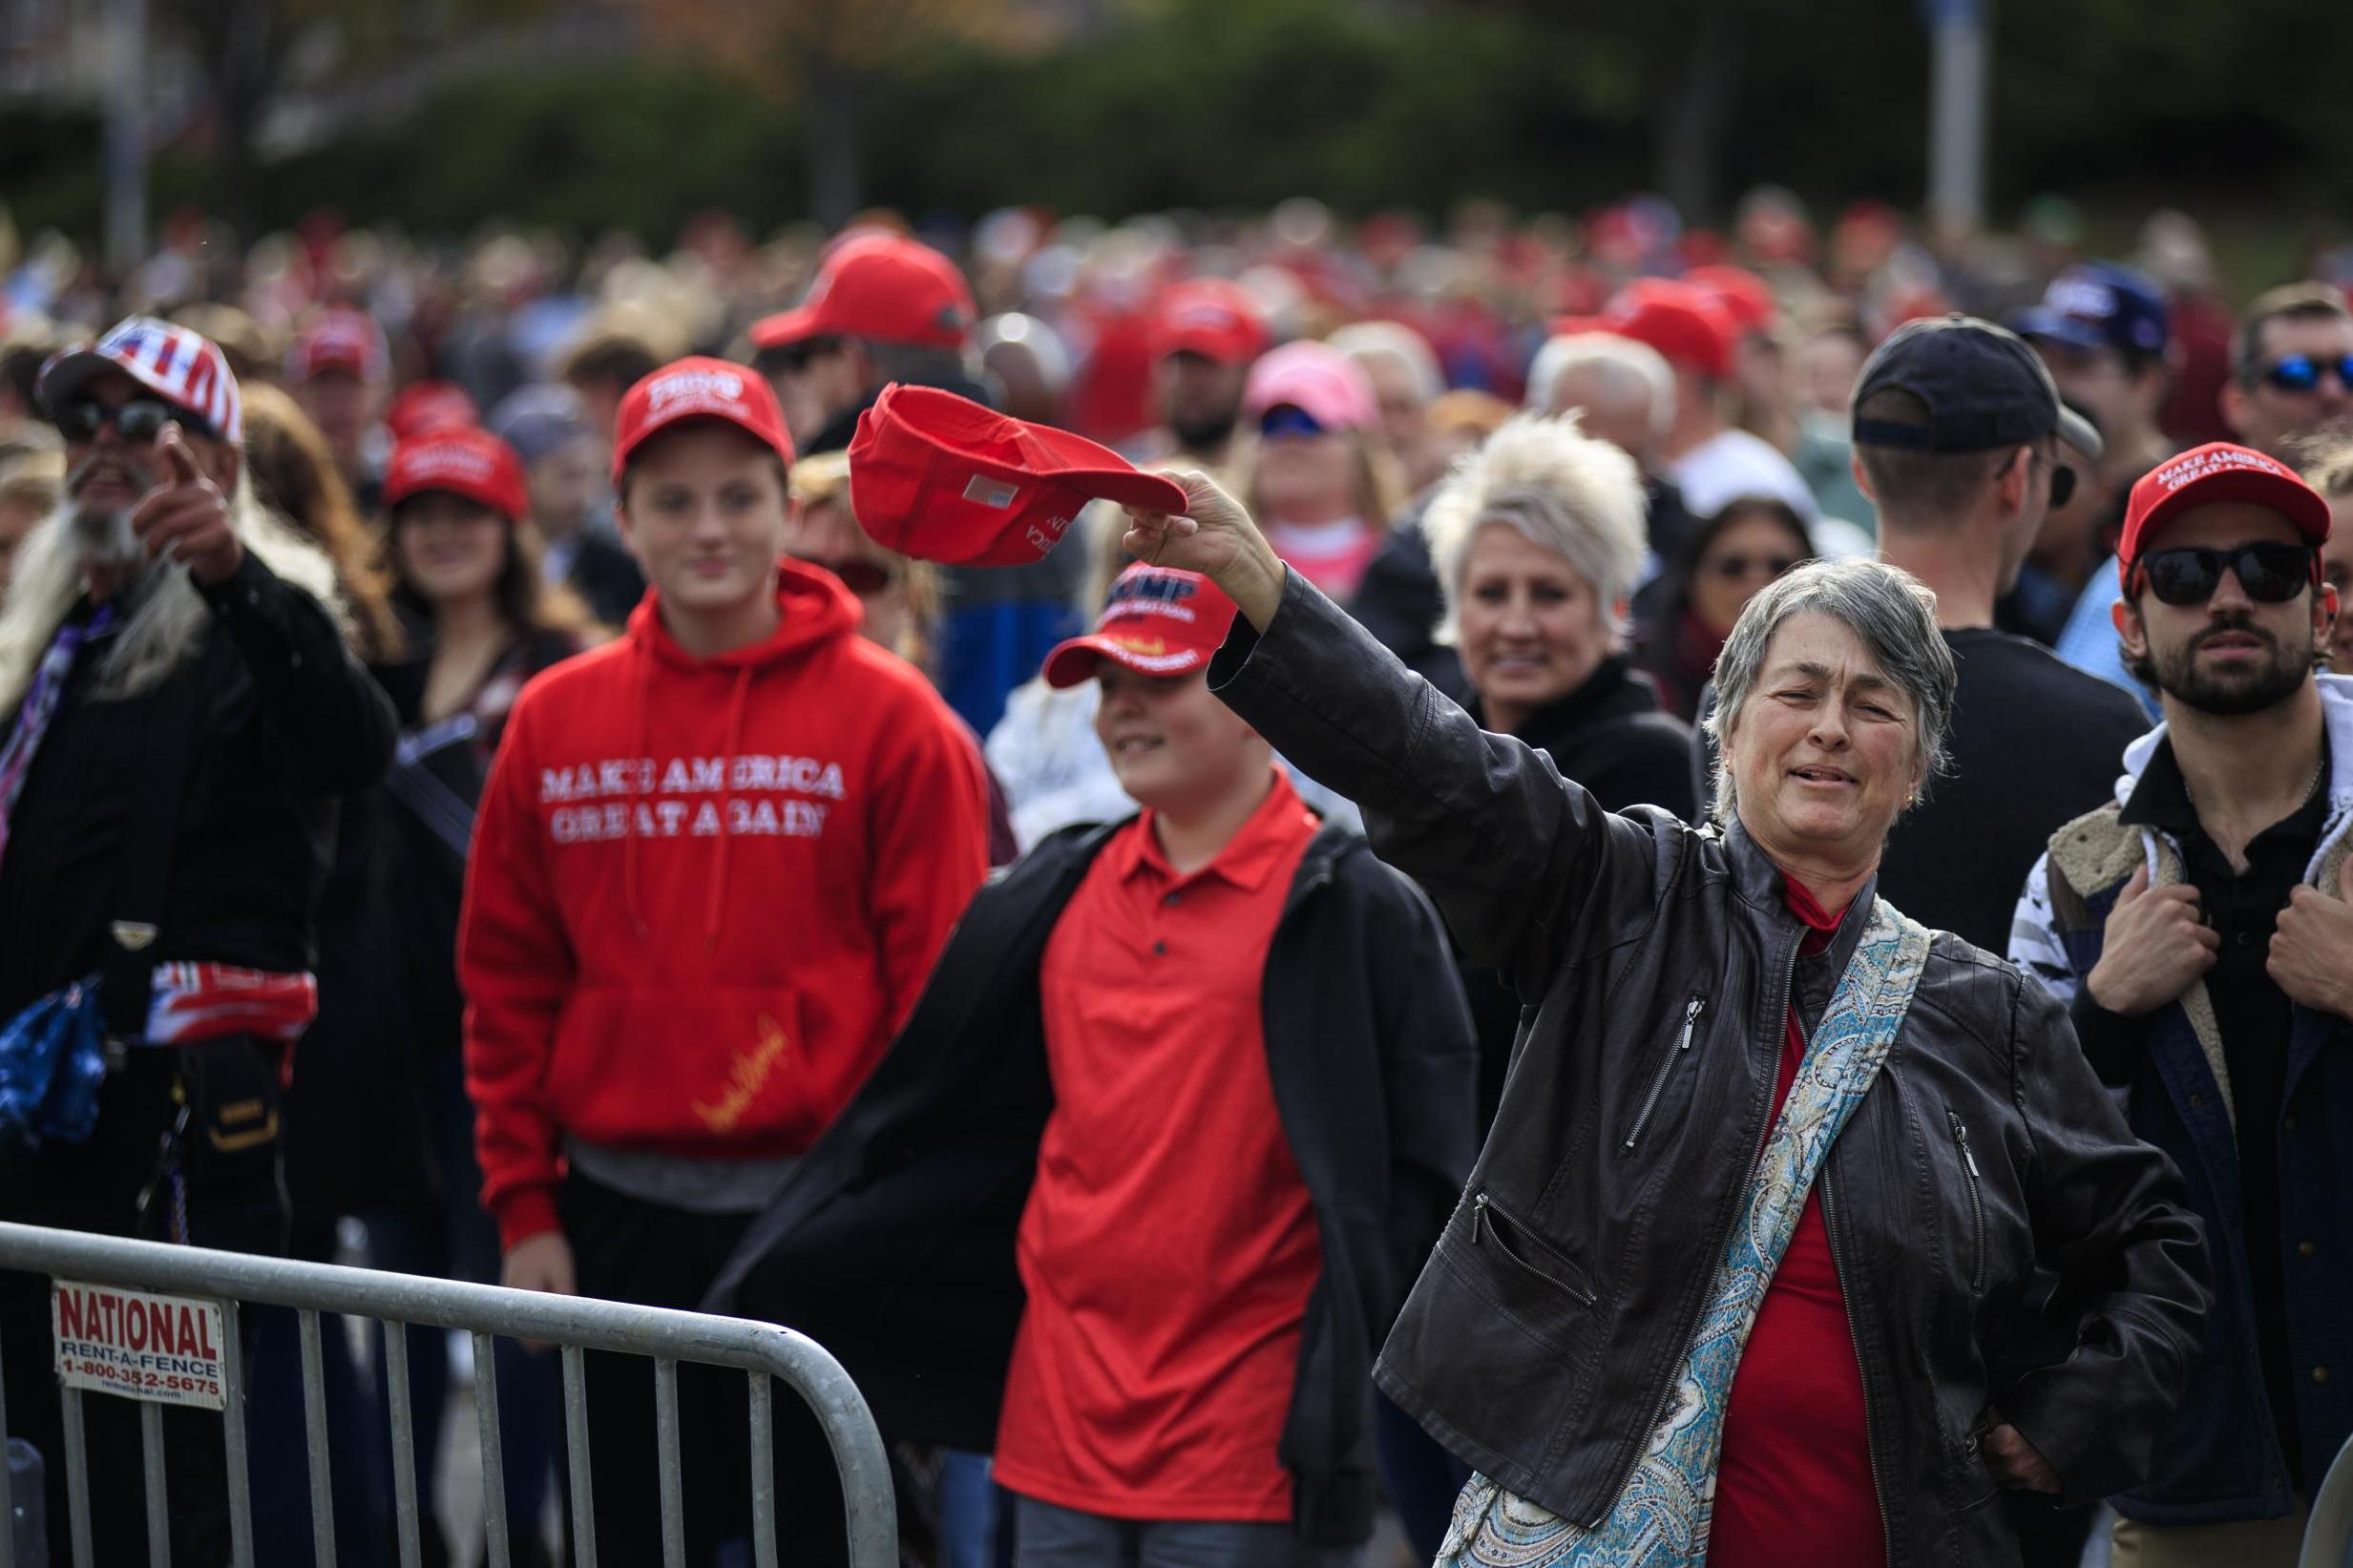 Midterms 2018: Inside Trump&apos;s Tennessee &apos;MAGA&apos; rally on the eve of crucial elections - &apos;Trump is literally my idol&apos;